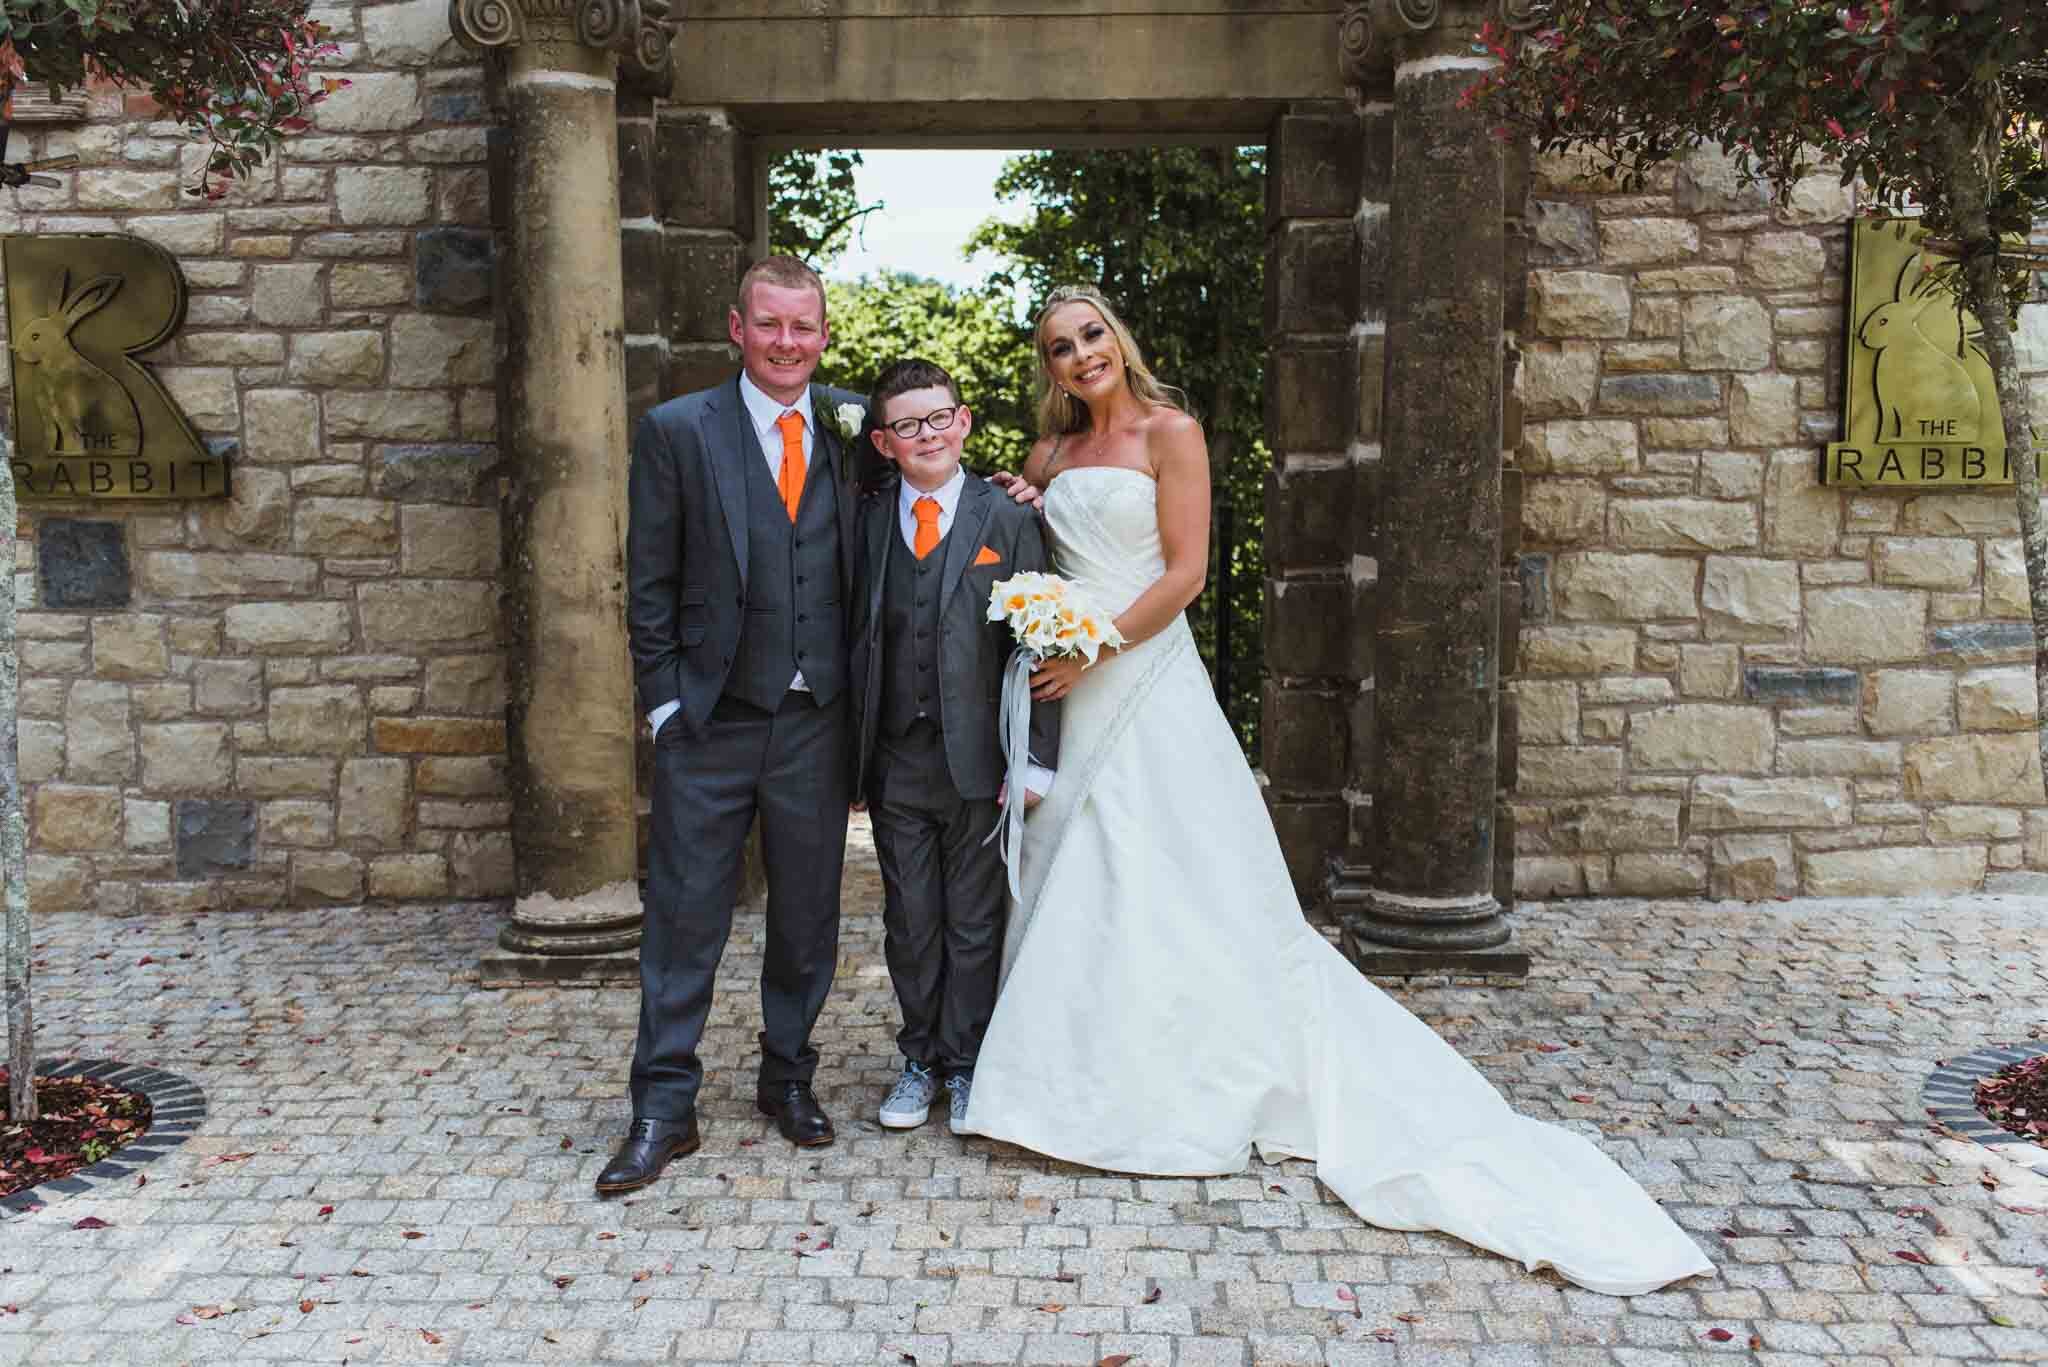  The bride, groom and their son are in front of a stone arch at the back of the hotel. 